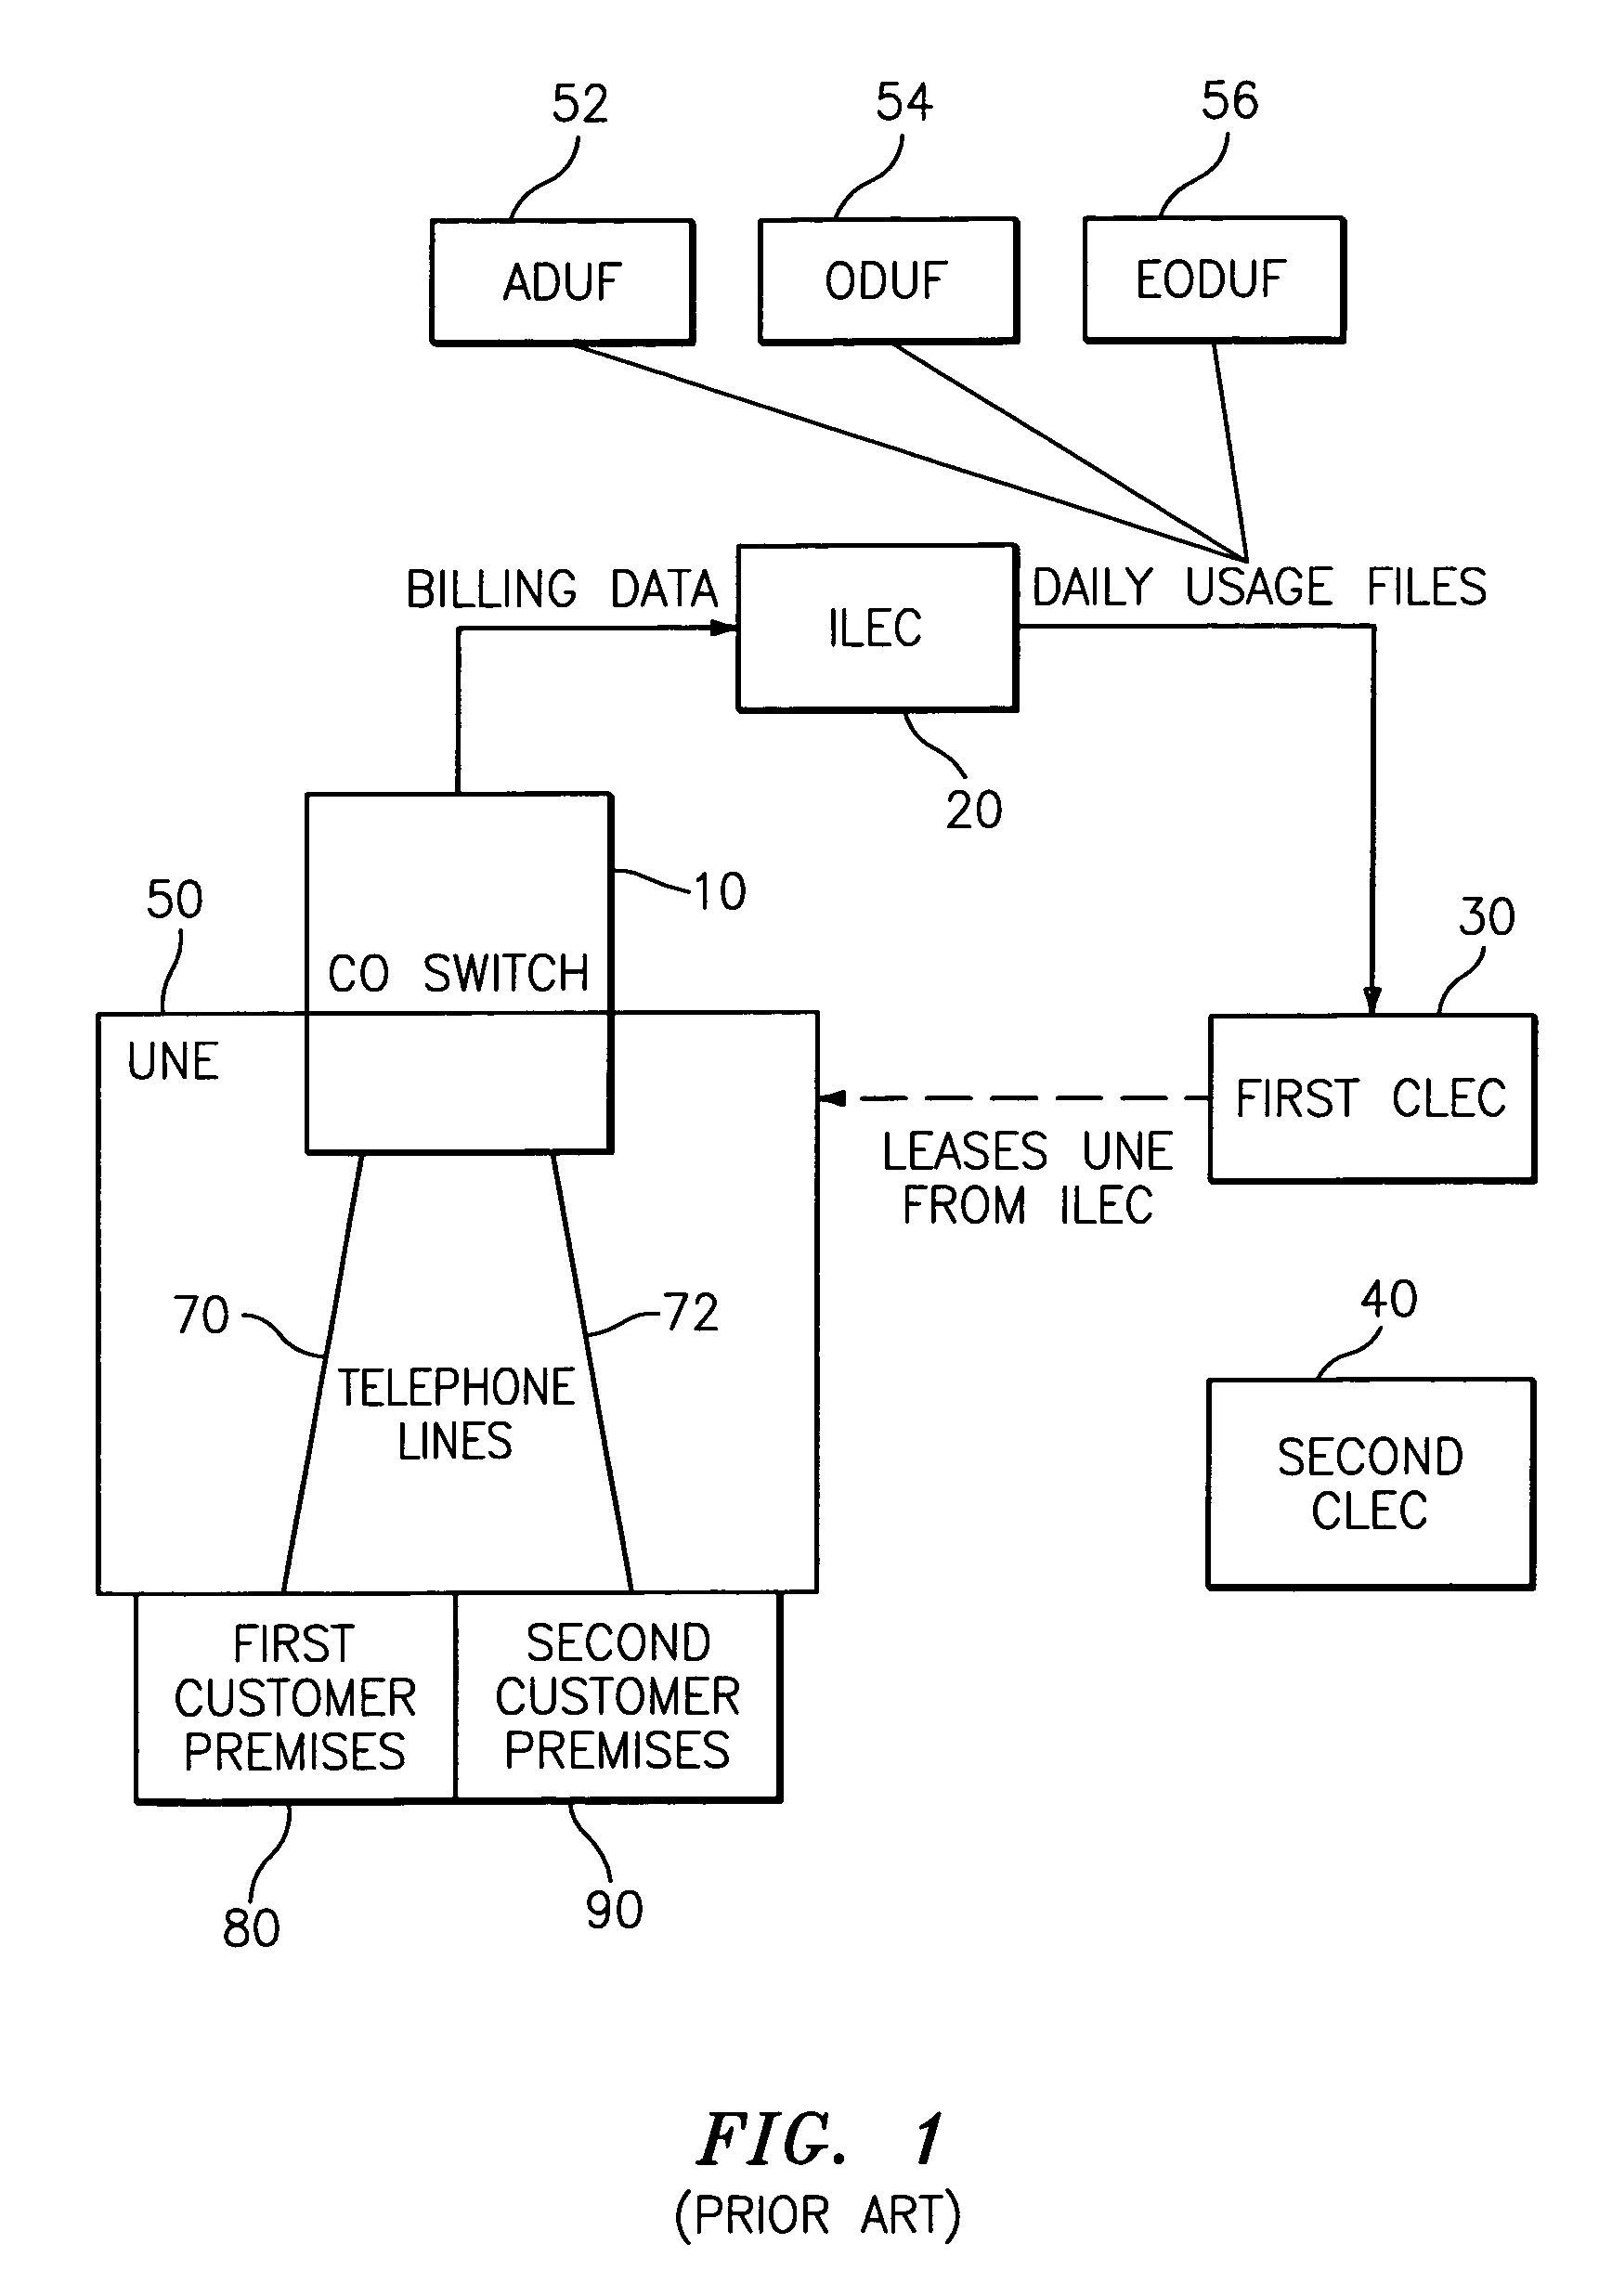 Methods, systems, and computer programs for generating a billing statement from detailed usage file records